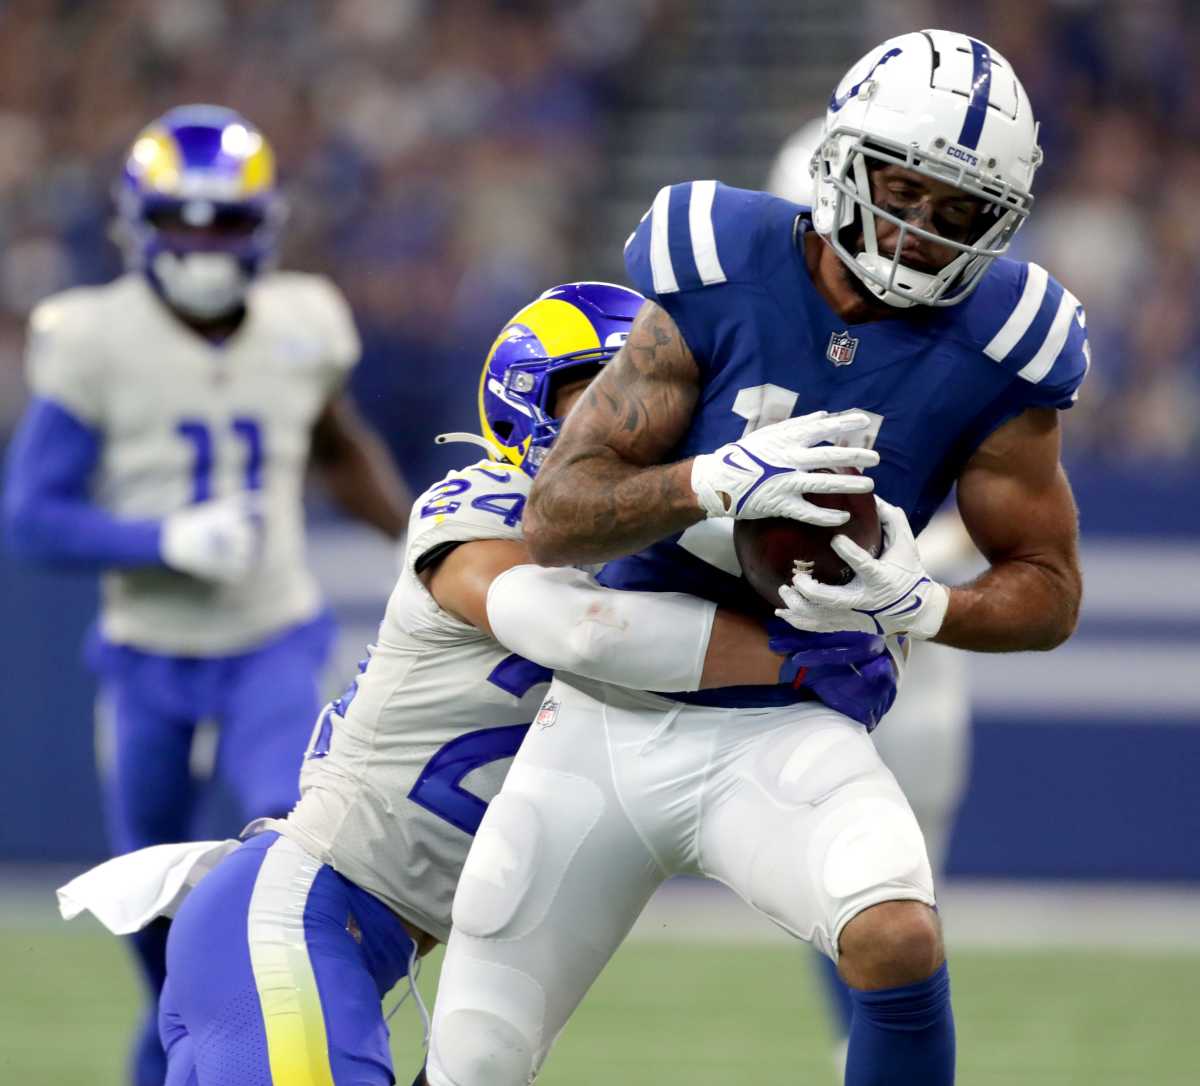 Los Angeles Rams safety Taylor Rapp (24) works to bring down Indianapolis Colts wide receiver Michael Pittman Jr. (11) on Sunday, Sept. 19, 2021, during a game against the Los Angeles Rams at Lucas Oil Stadium in Indianapolis.